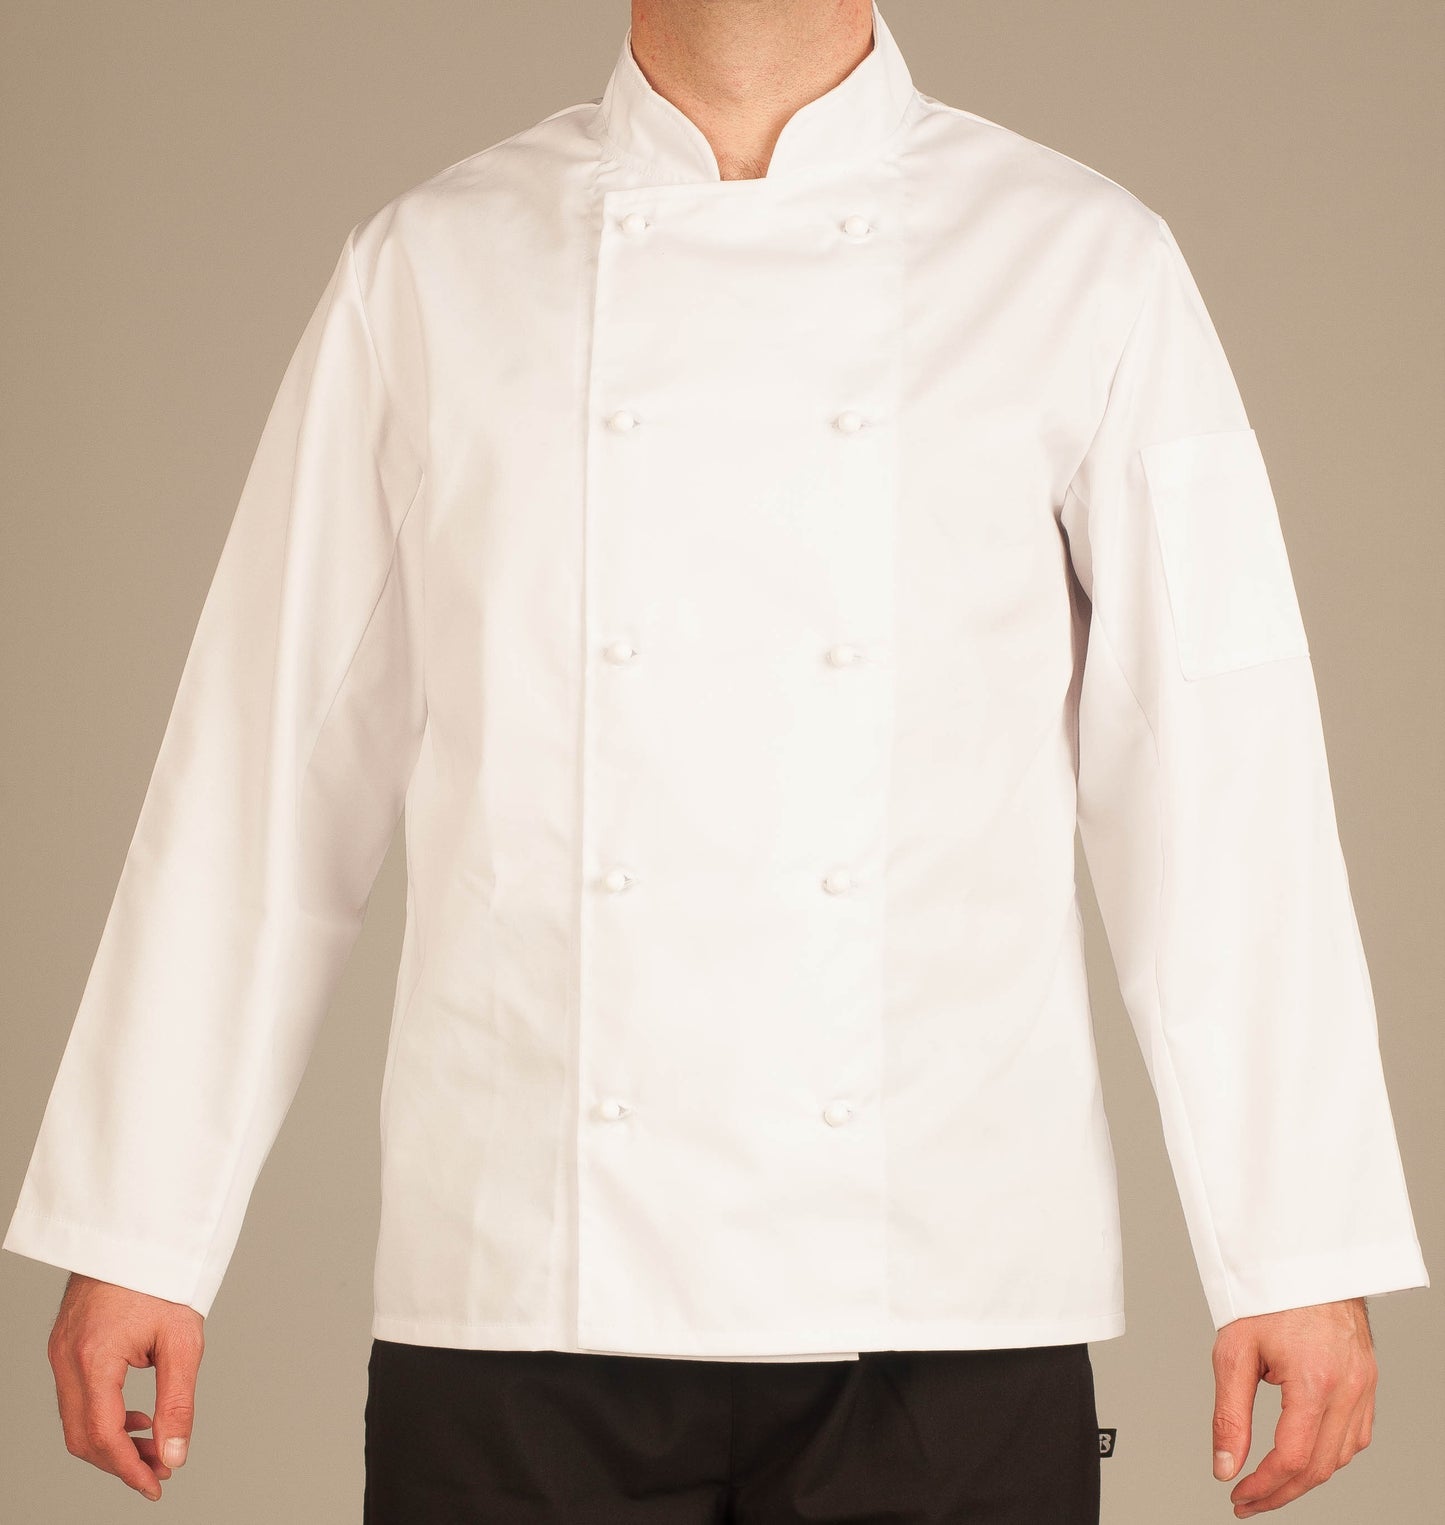 James Chef Jacket - Long Sleeves black or white